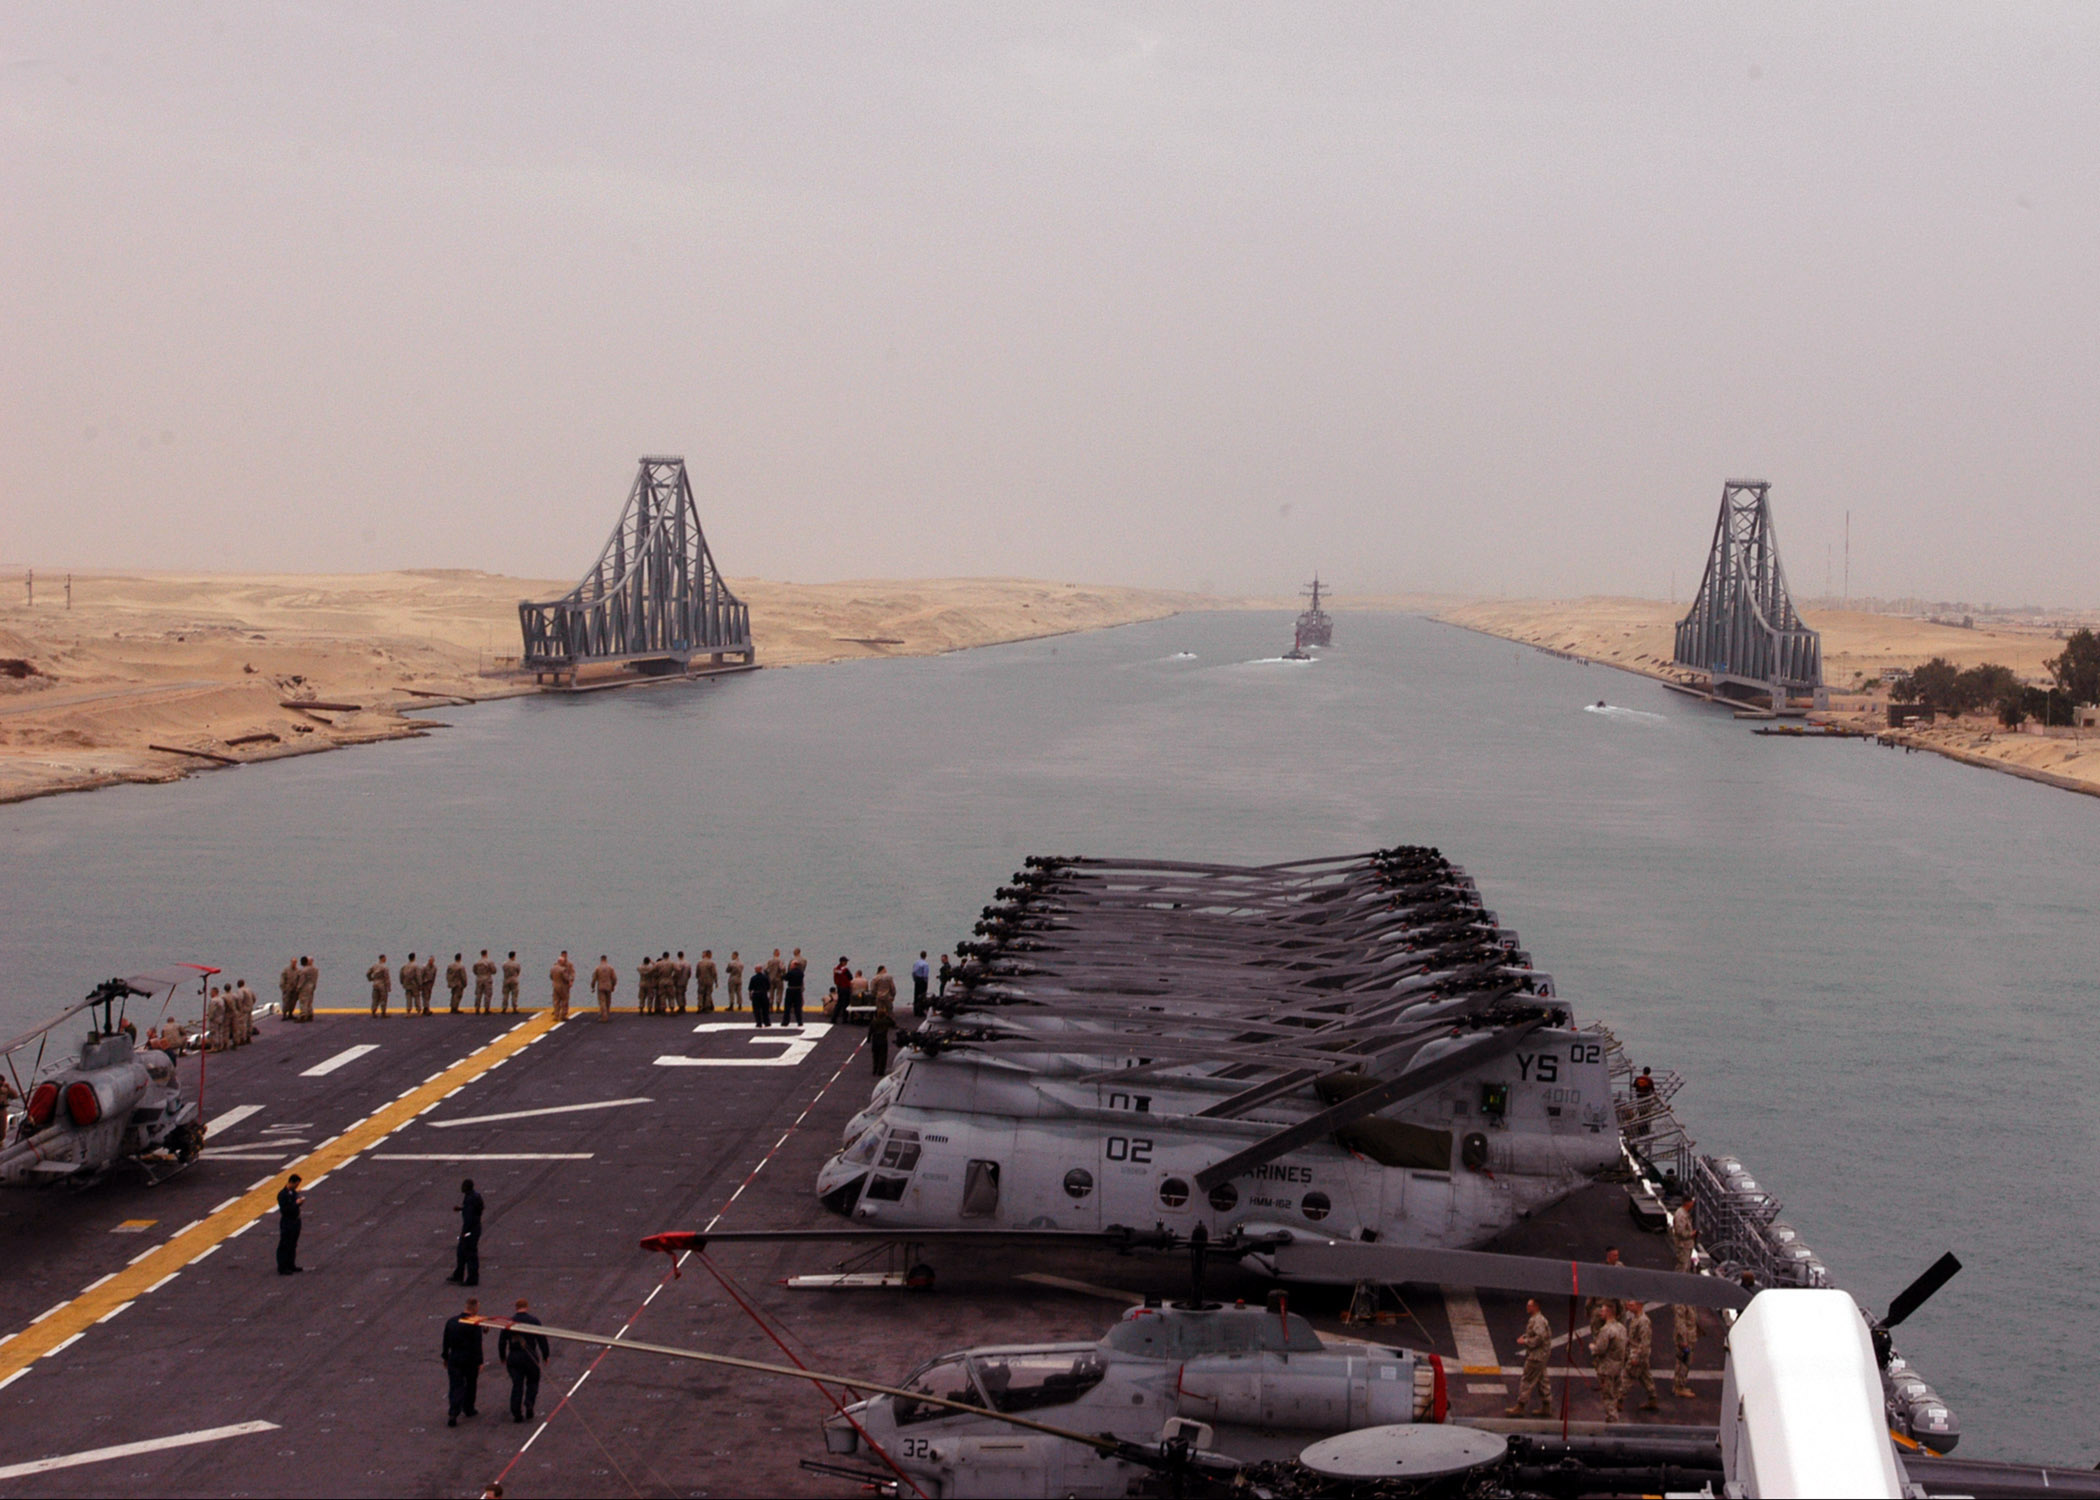 US_Navy_050422-N-3557N-016_The_amphibious_assault_ship%2C_USS_Kearsarge_%28LHD_3%29_transits_the_Suez_Canal_behind_the_guided_missile_destroyer_USS_Gonzalez_%28DDG_66%29.jpg